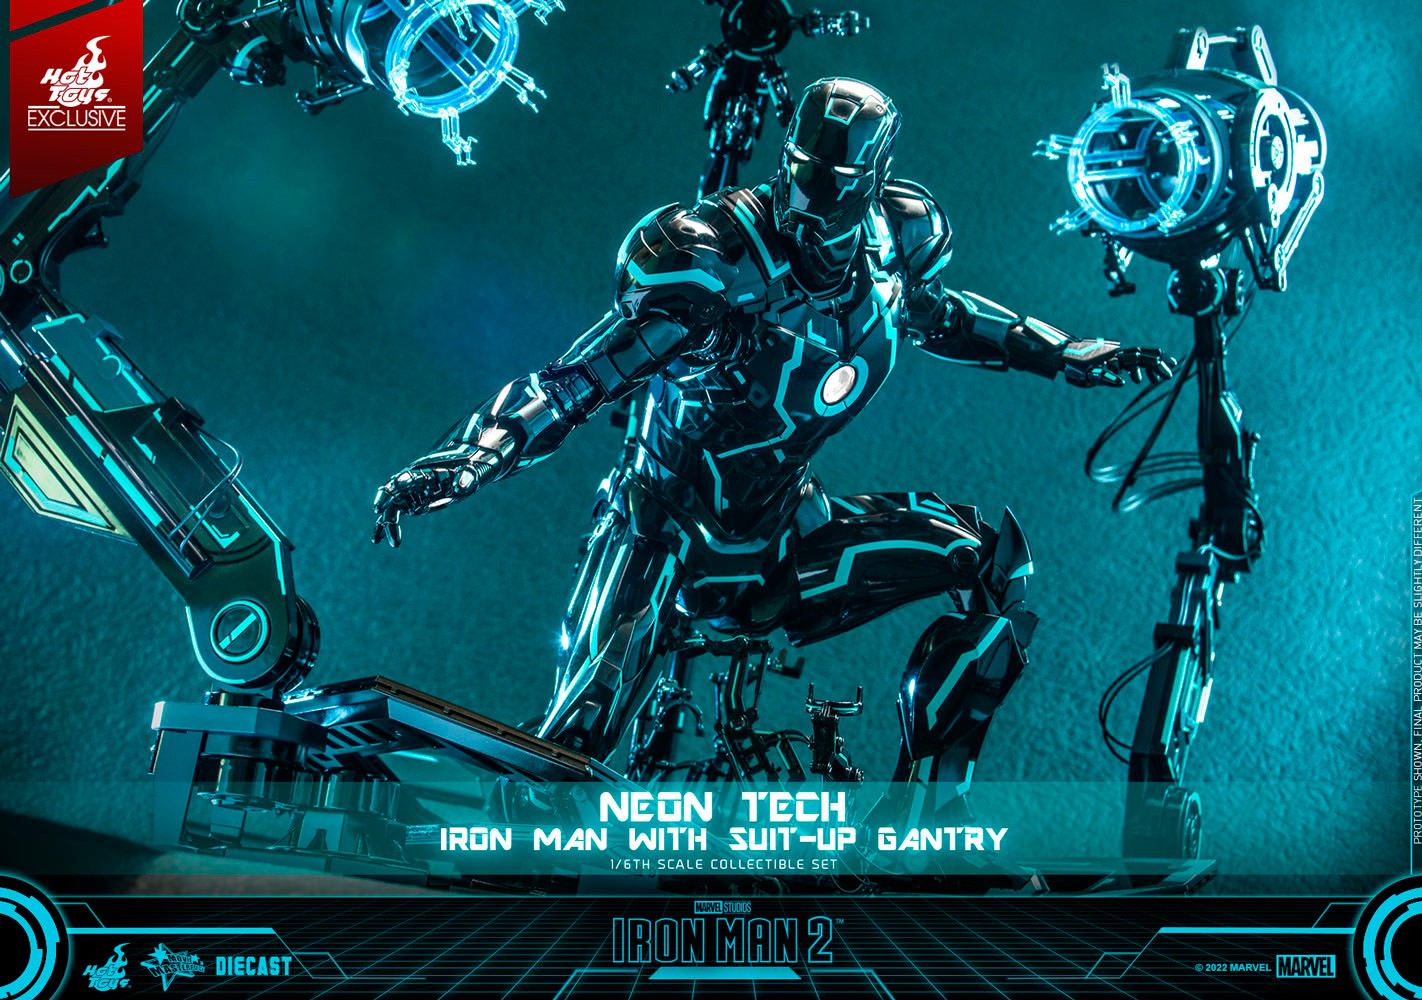 Neon Tech Iron Man with Suit-Up Gantry (Prototype Shown) View 2